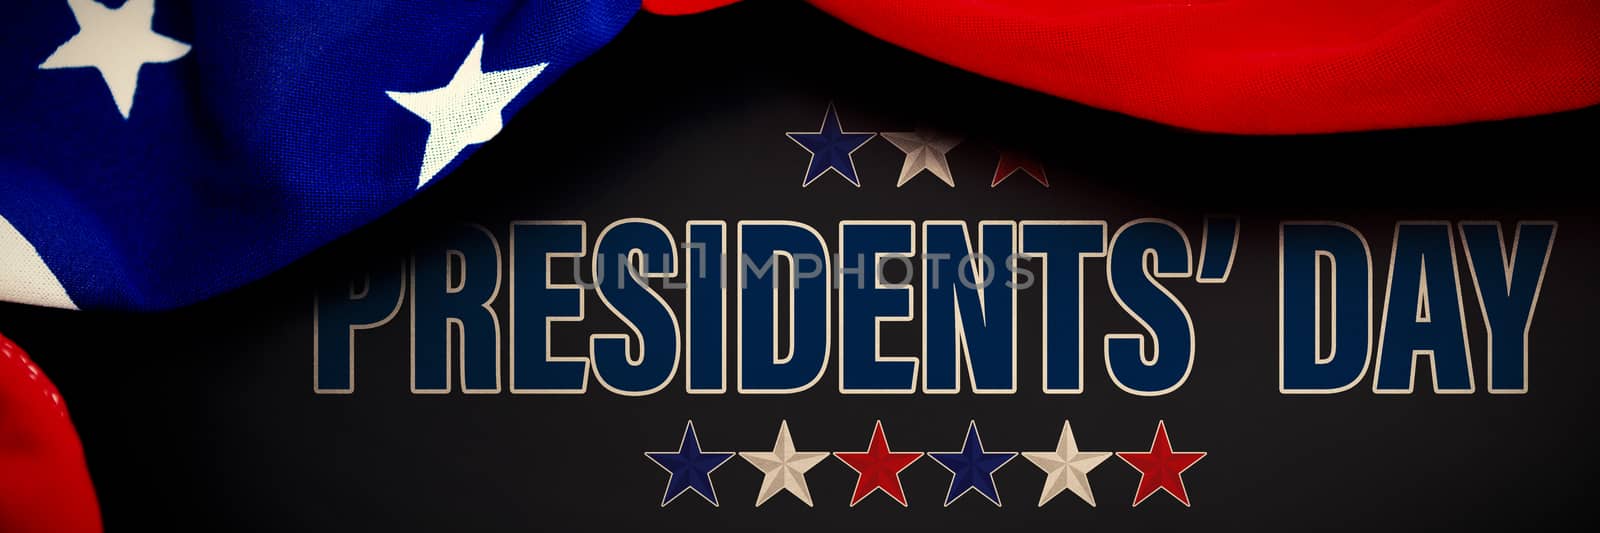 presidents day. Vector typography, stars against american flag over black background